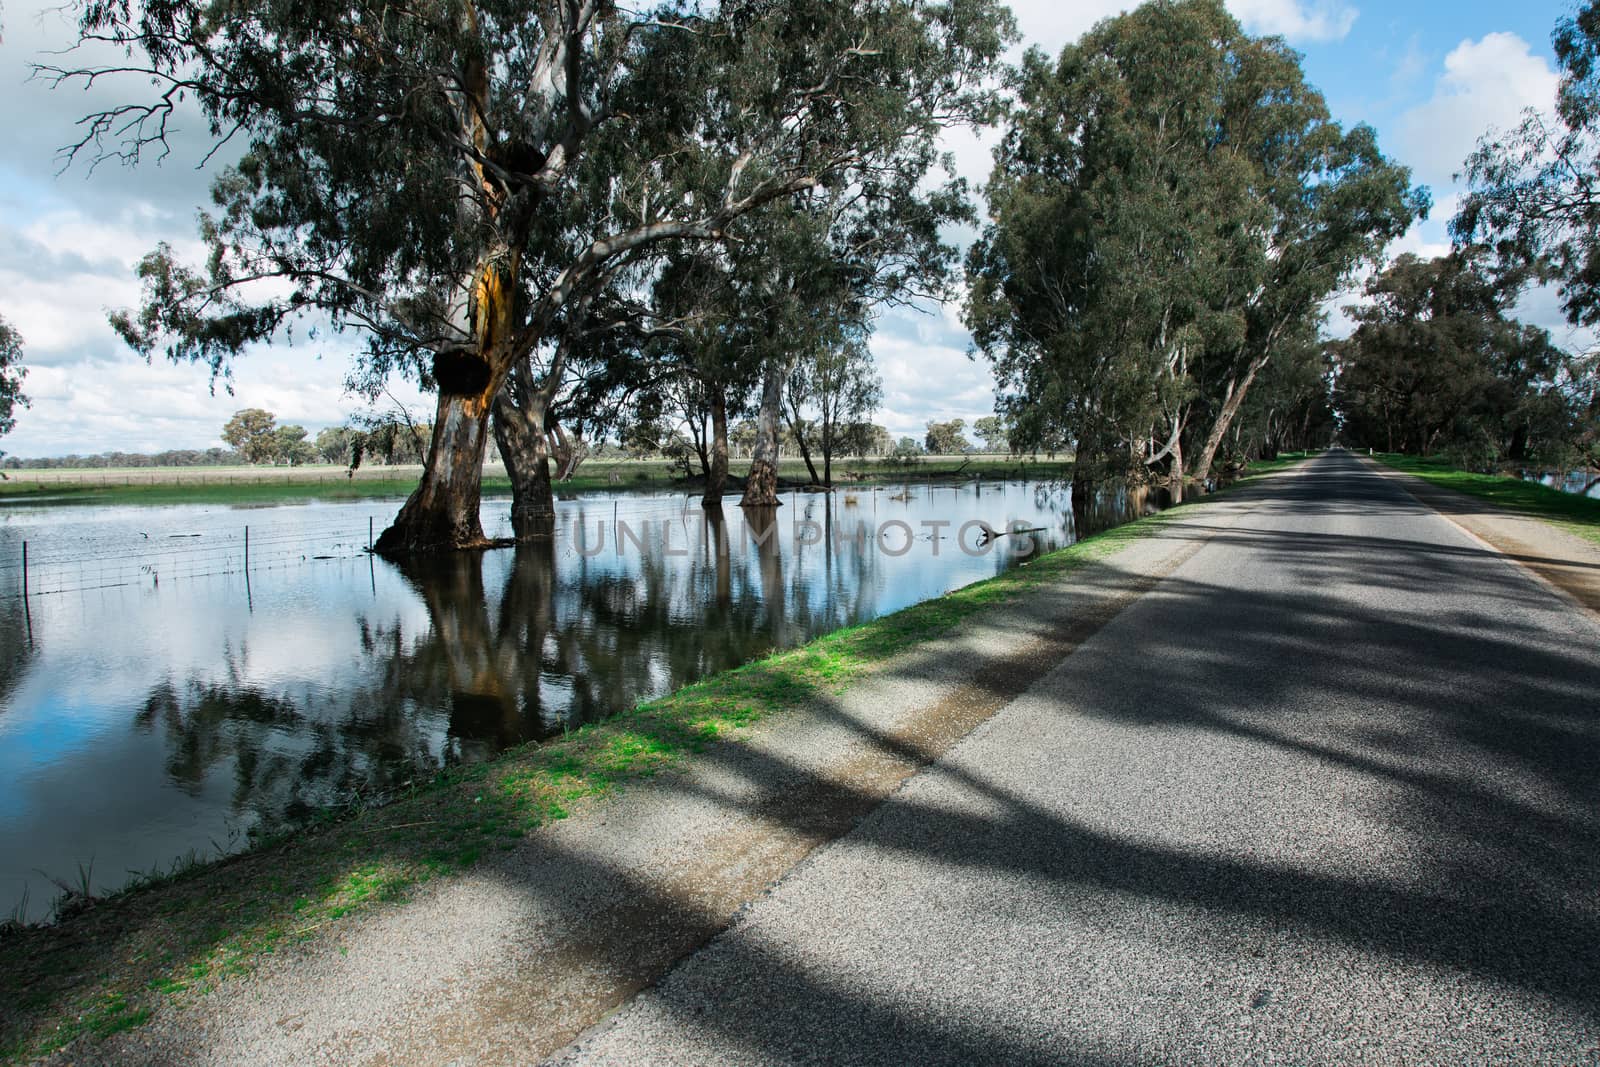 Flooding in the North West region of Victoria, Australia. Recent rain has been so heavy that there is standing water up to 1 metre deep along the side of rural roads.